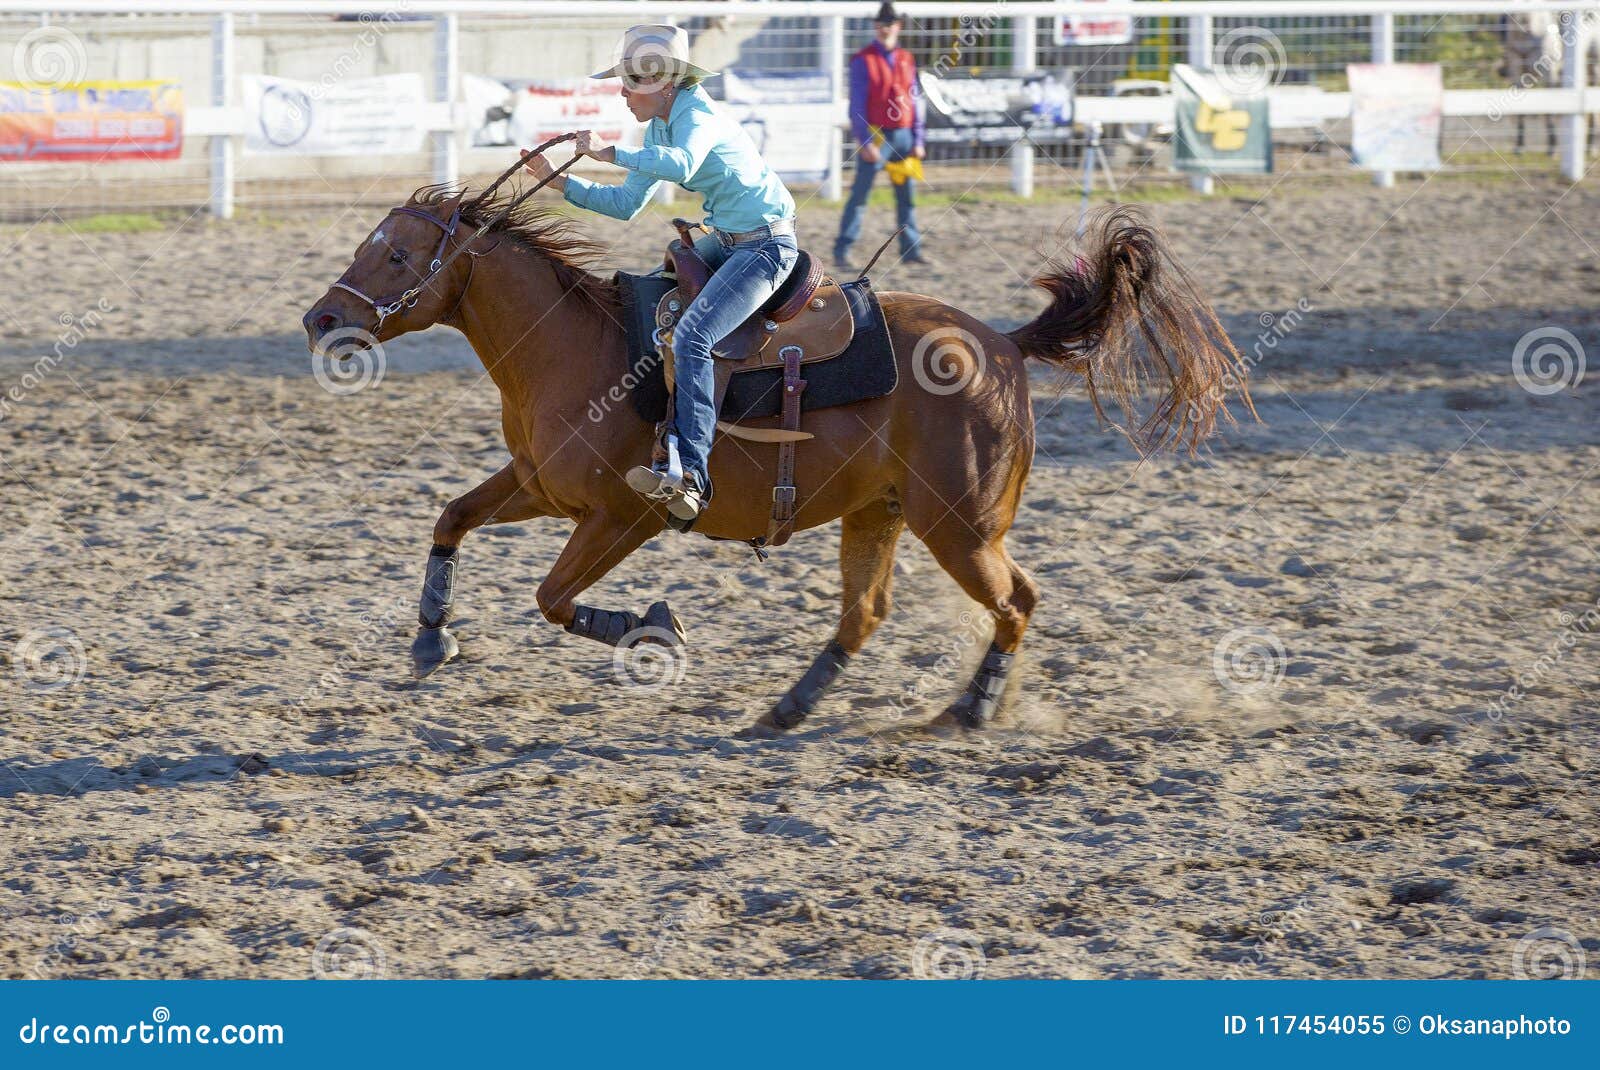 Cowgirls Competing In Barrel Riding Editorial Image Image Of Leaning